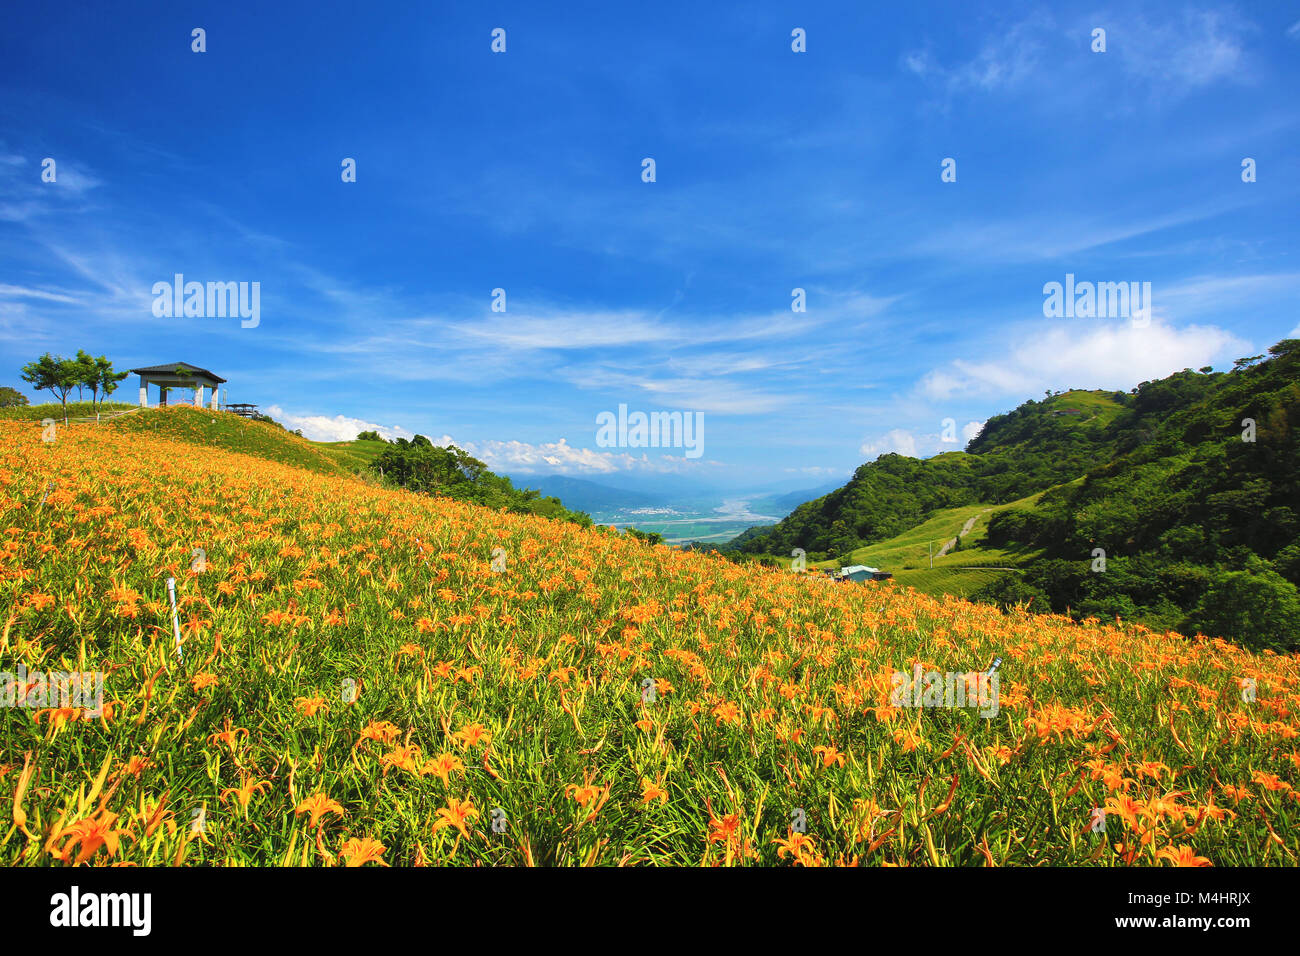 Beautiful scenery of daylily flowers with pavilion and mountains in a sunny day Stock Photo